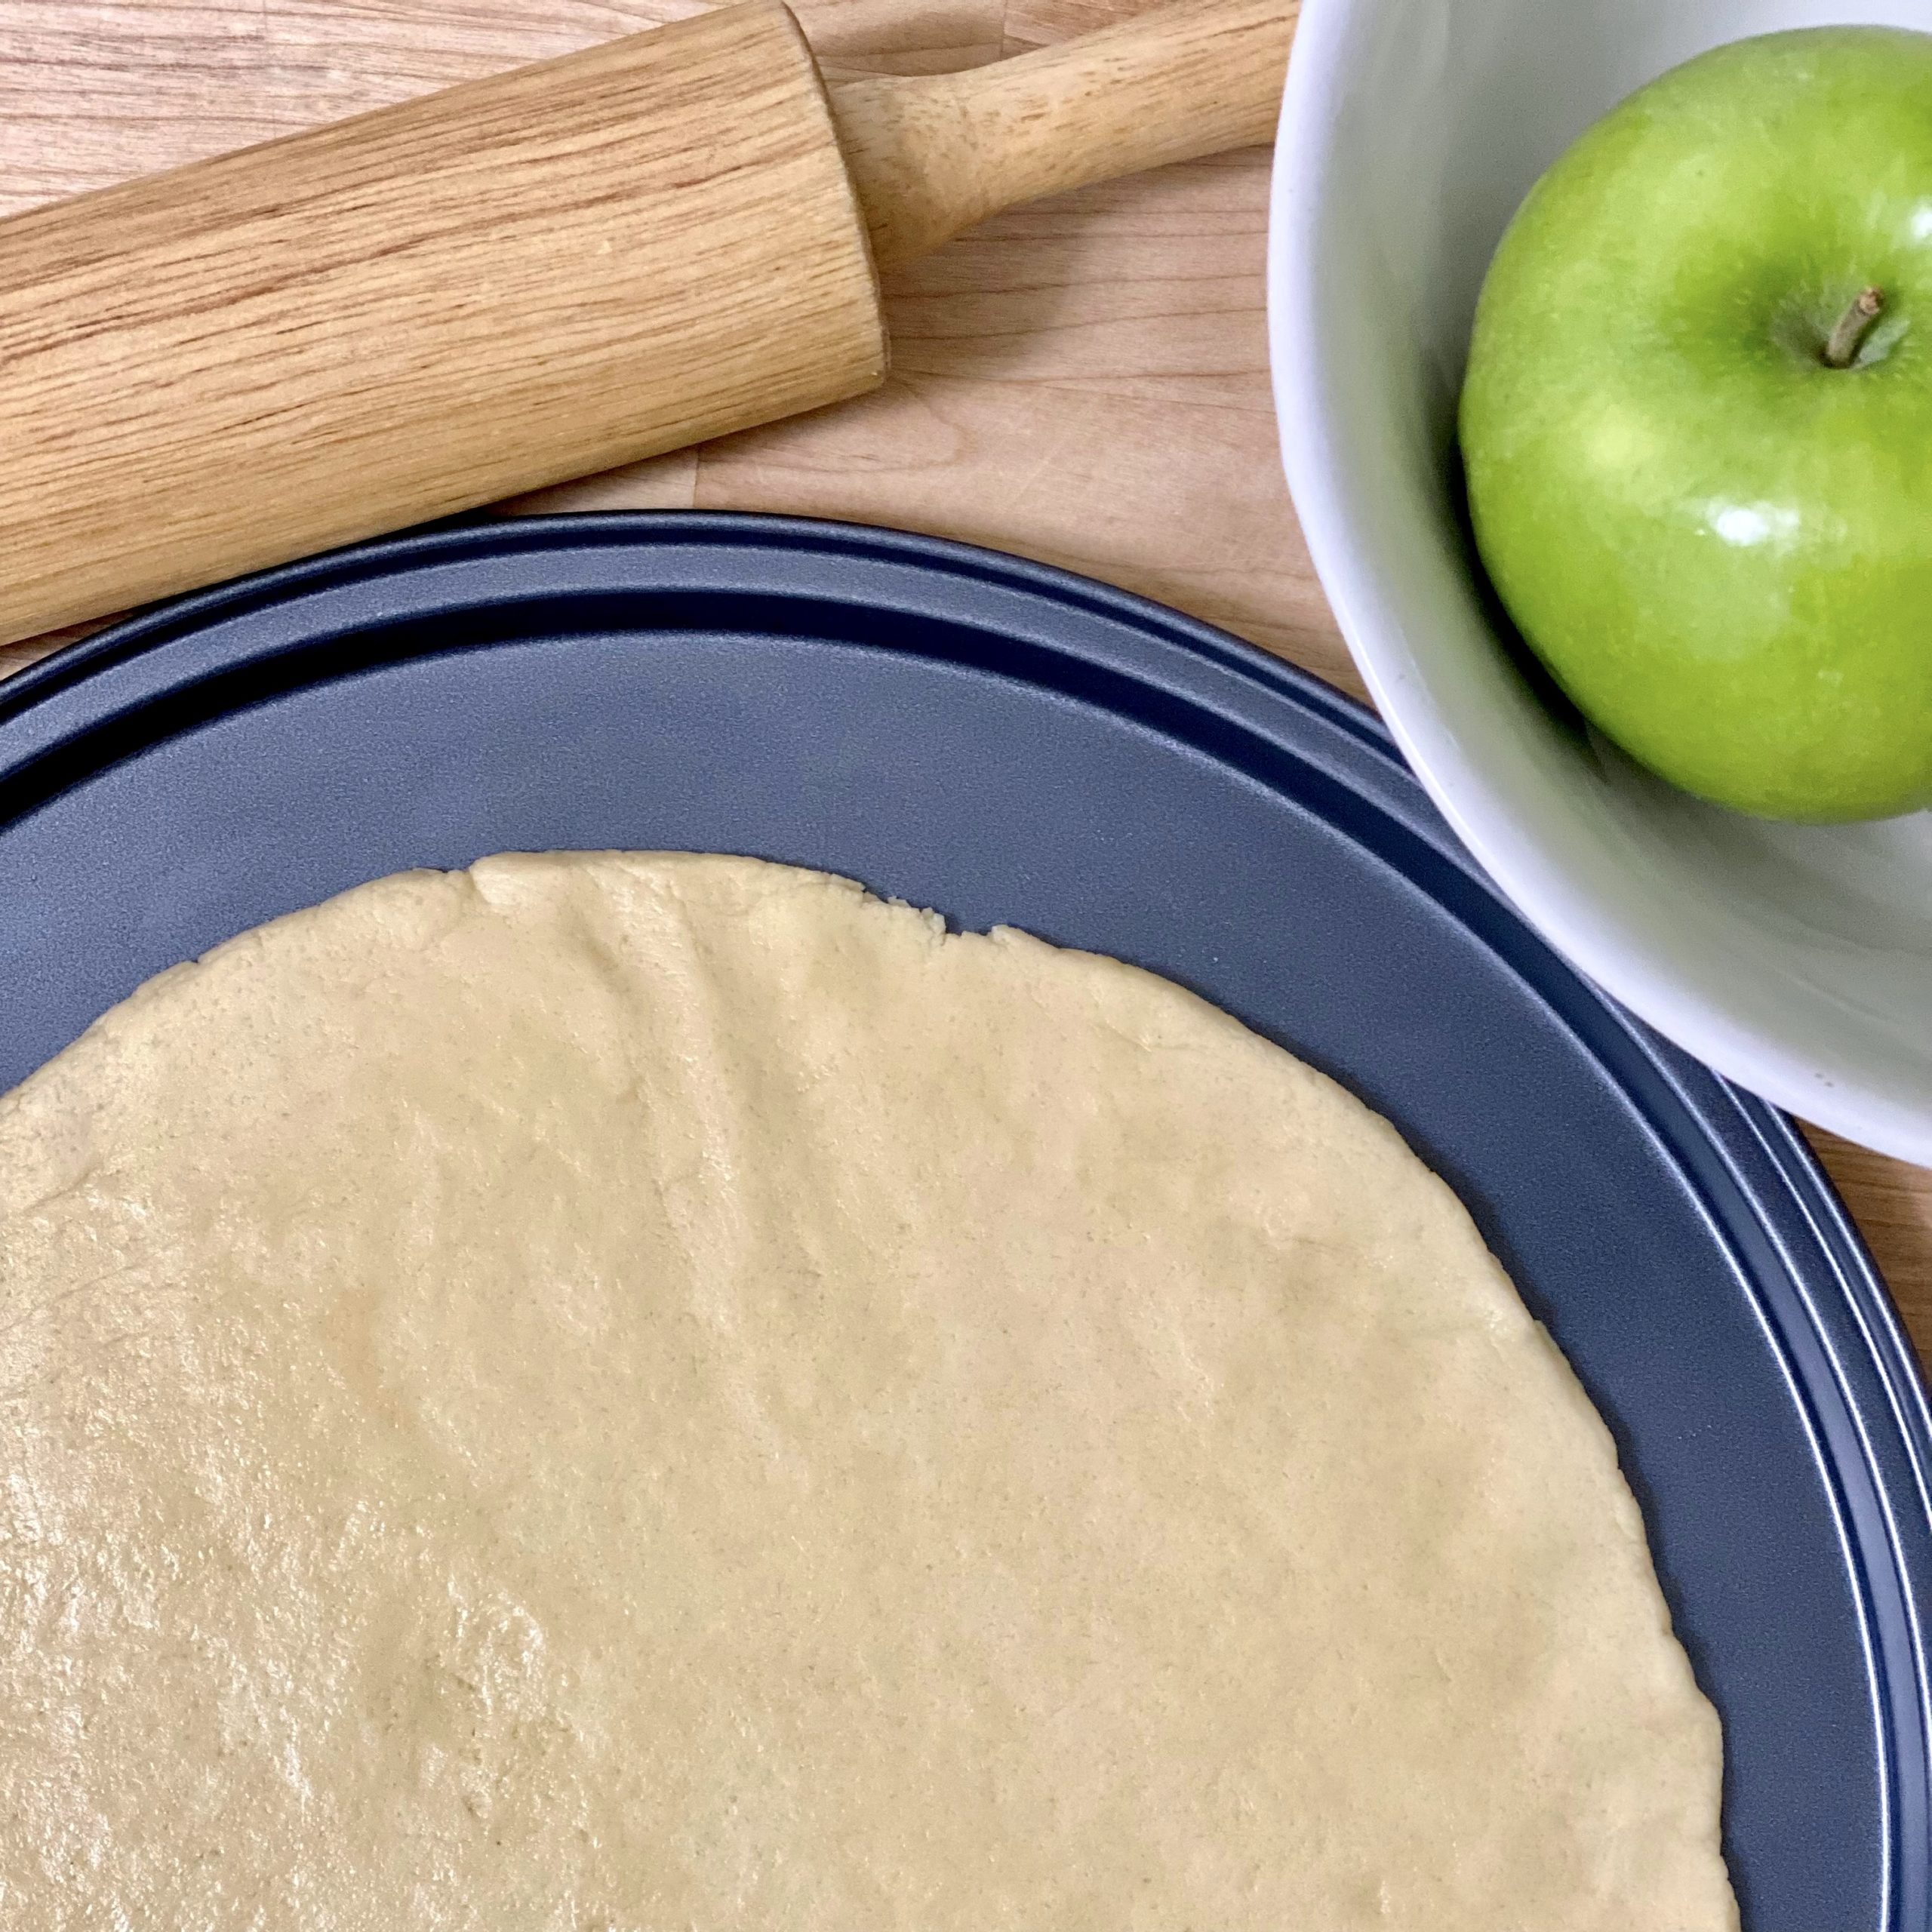 Apple pie pizza crust in the pizza pan before baking with a rolling pin and apple next to it.